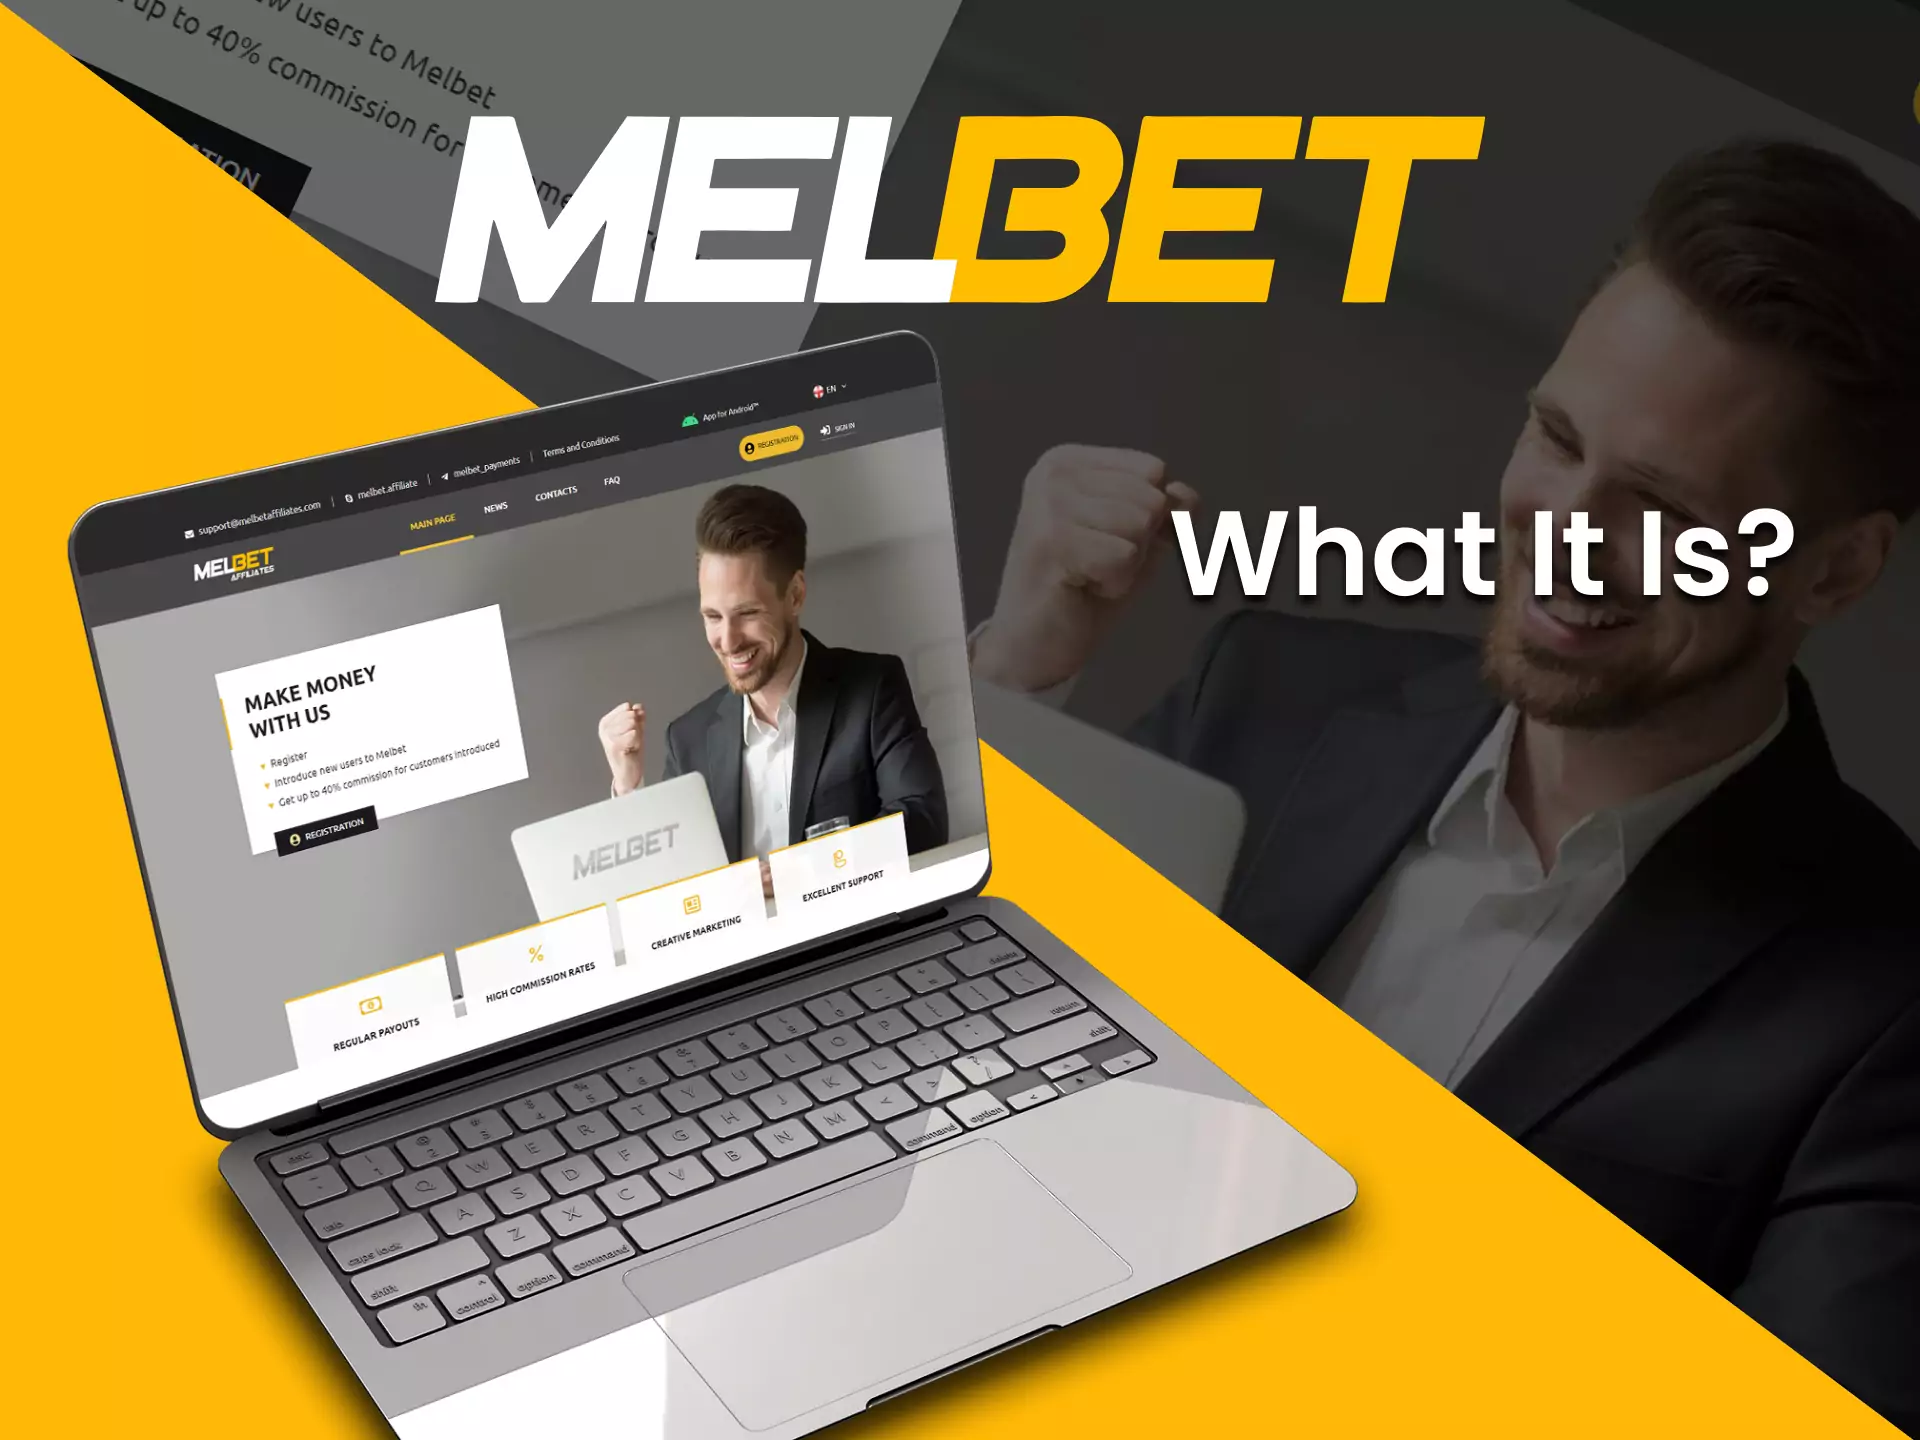 The affiliate program provided by Melbet helps to earn more money by inviting friends to the betting platform.